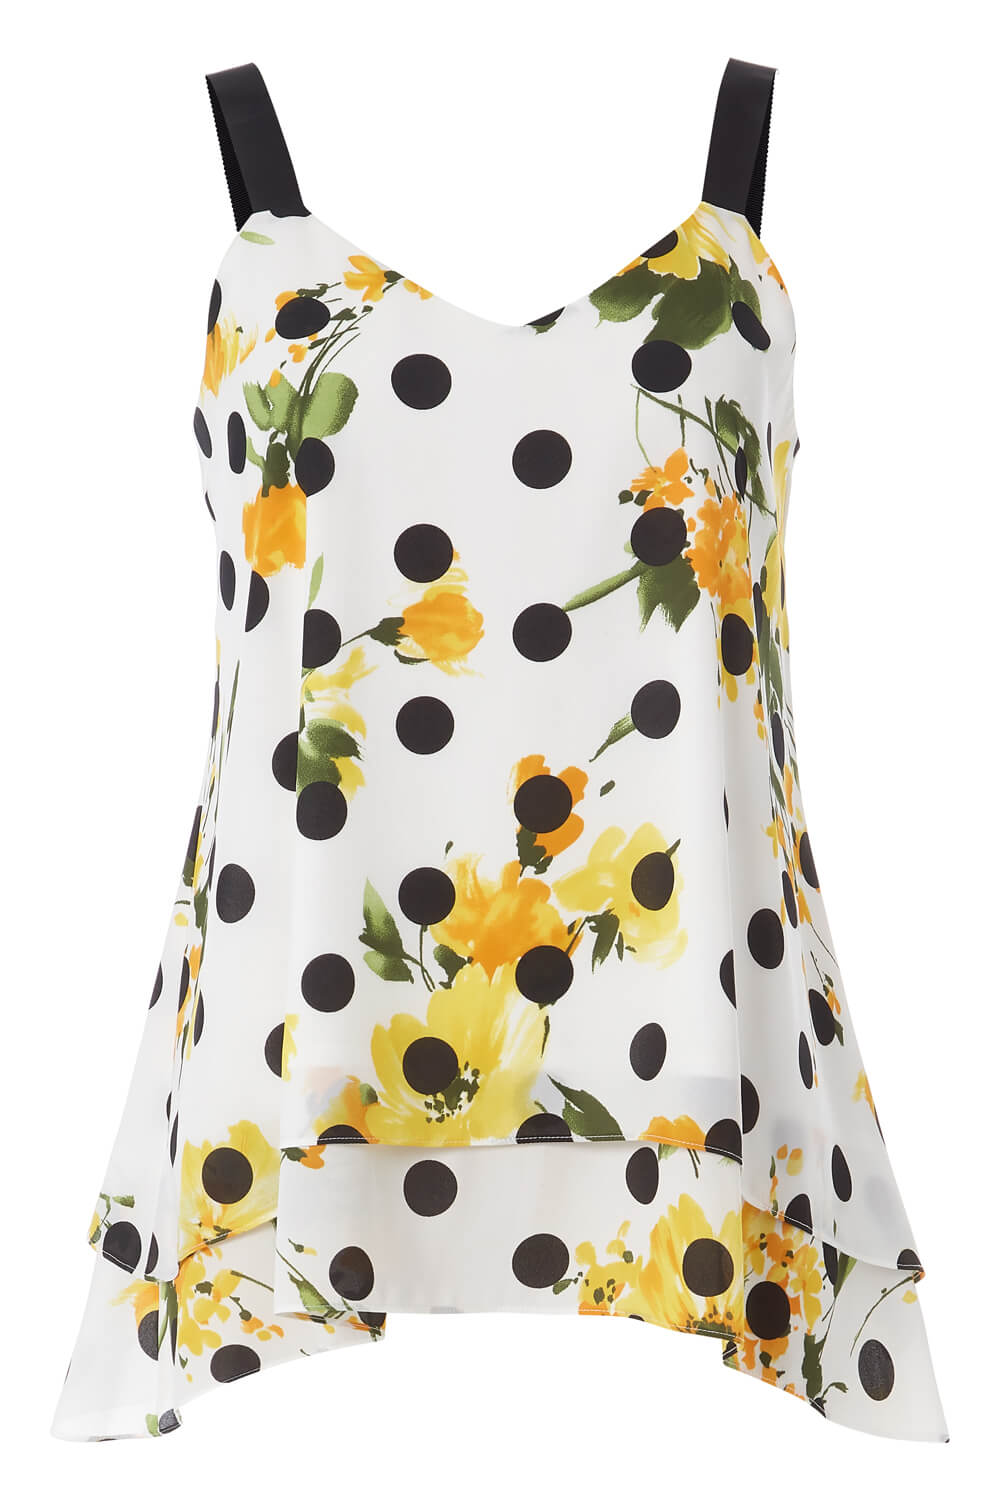 Yellow Floral Spot Print Overlay Vest Top, Image 5 of 5